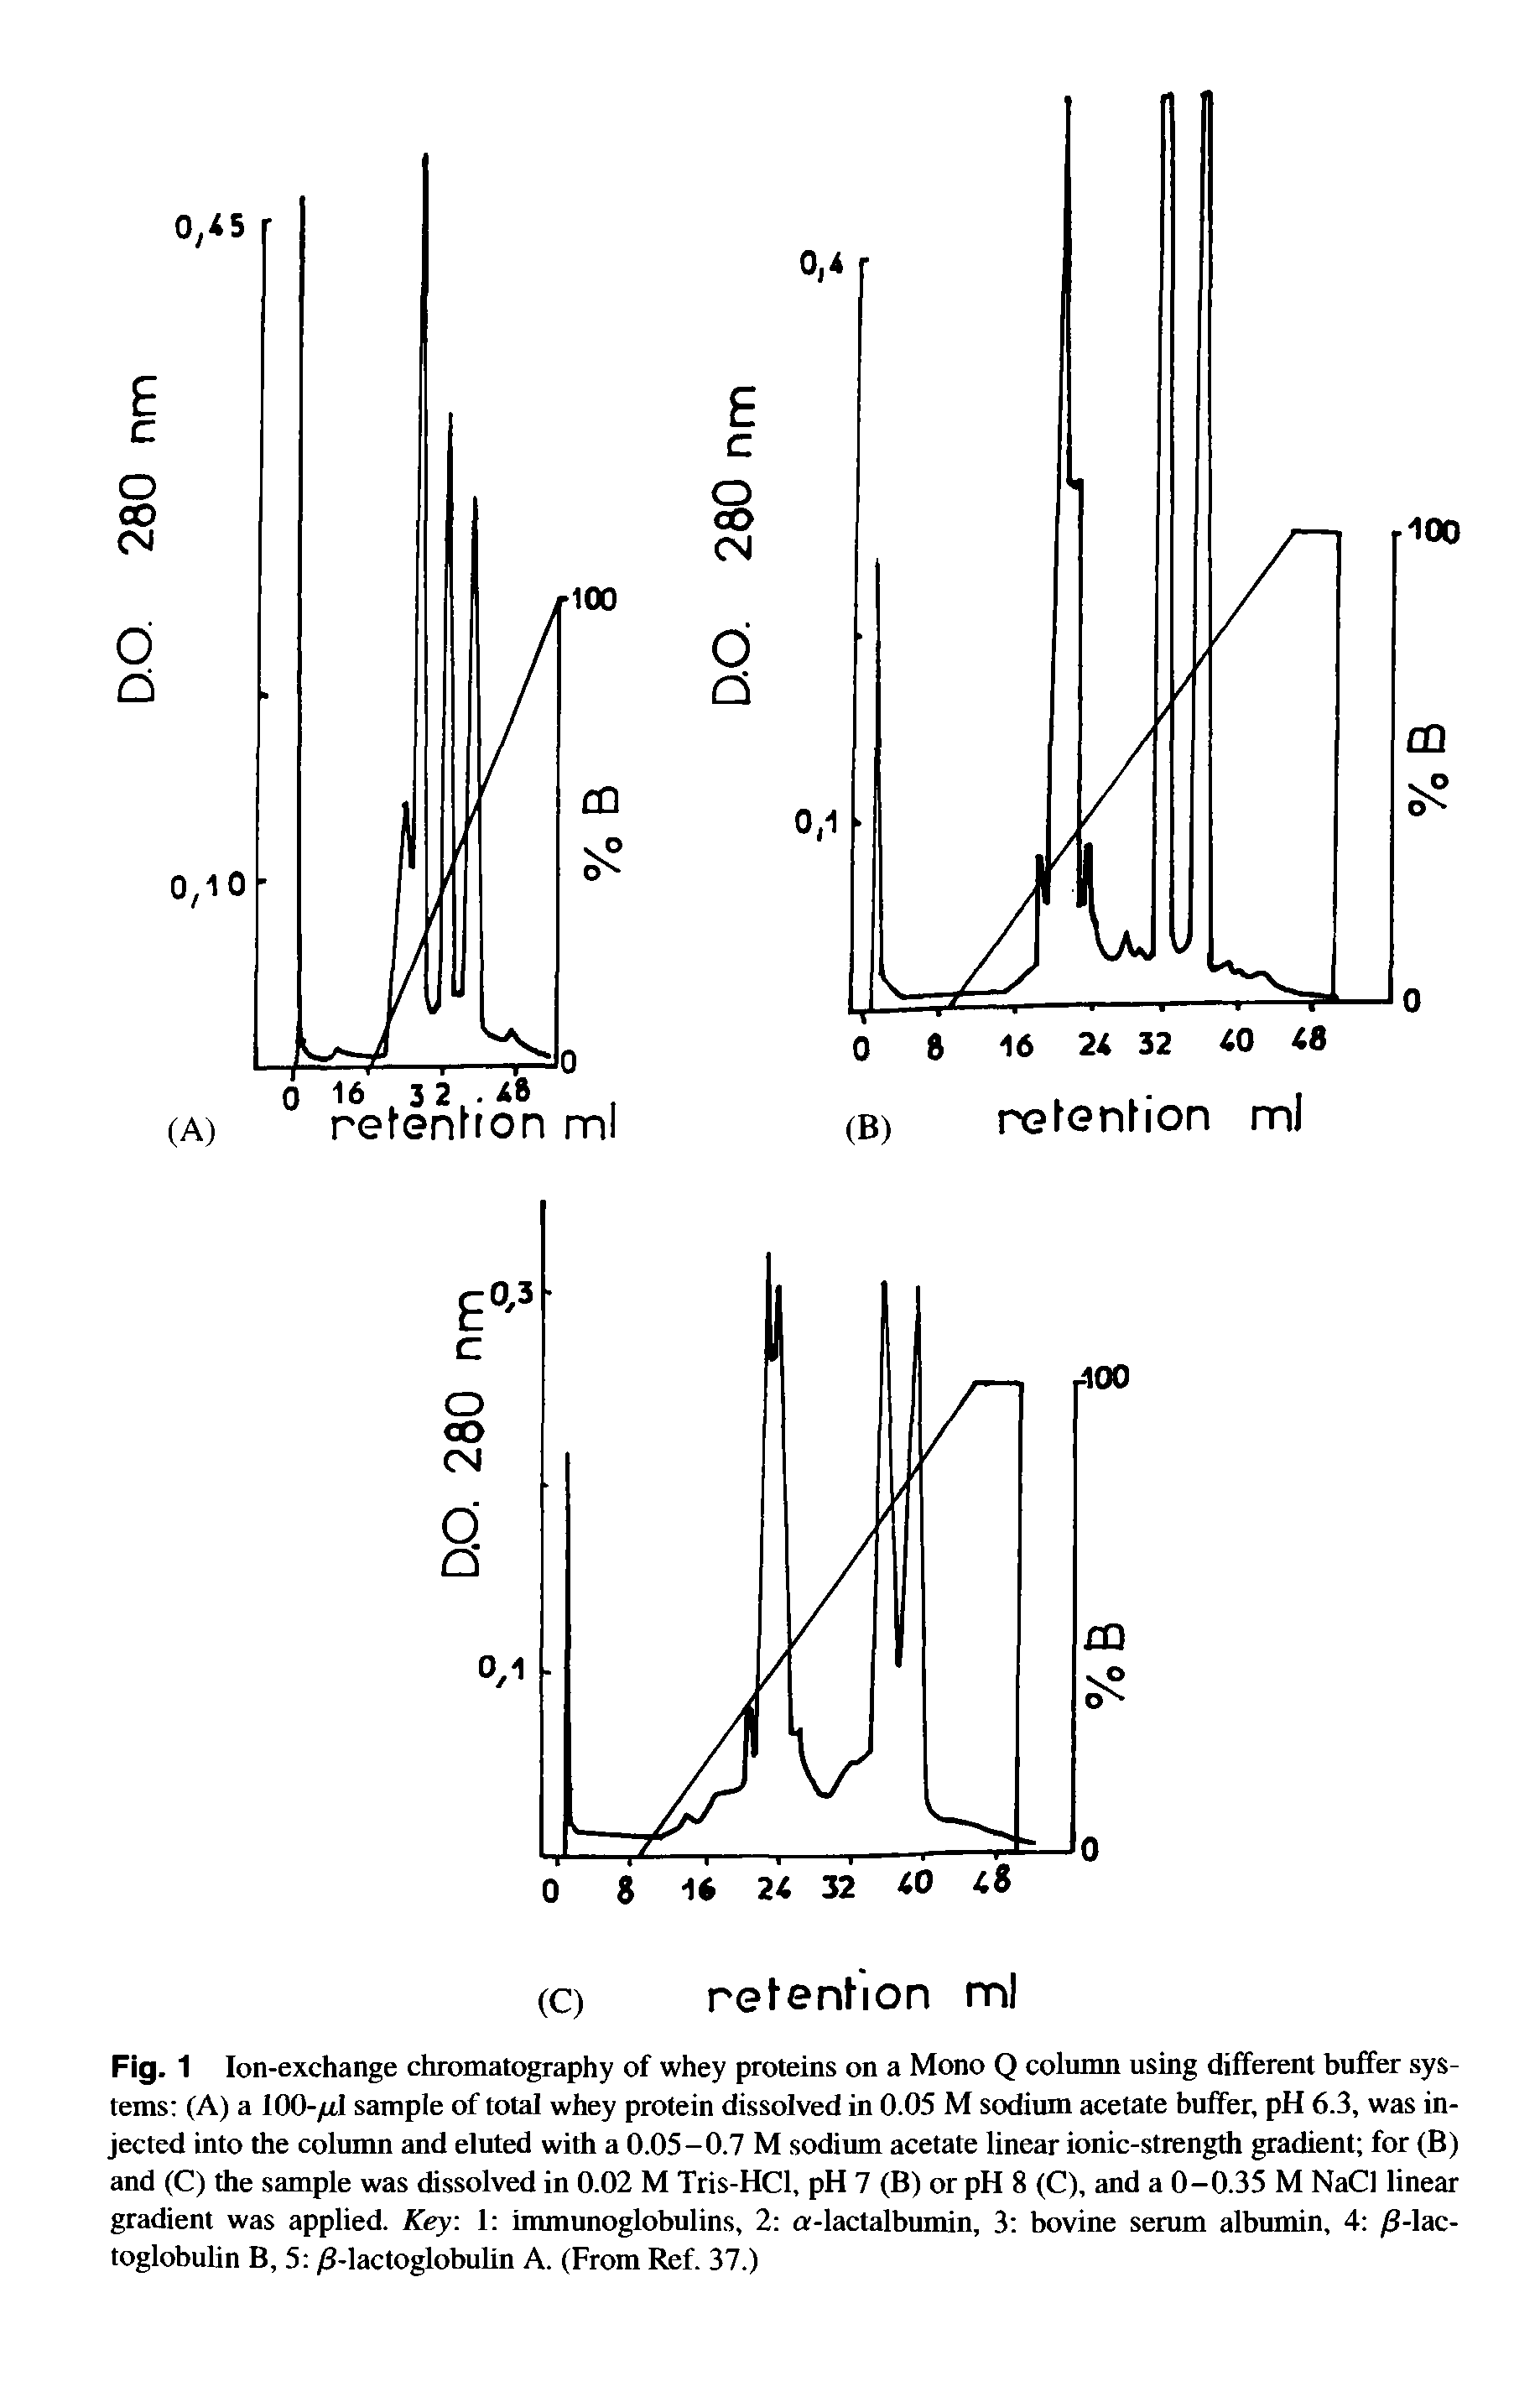 Fig. 1 Ion-exchange chromatography of whey proteins on a Mono Q column using different buffer systems (A) a 100-/rl sample of total whey protein dissolved in 0.05 M sodium acetate buffer, pH 6.3, was injected into the column and eluted with a 0.05-0.7 M sodium acetate linear ionic-strength gradient for (B) and (C) the sample was dissolved in 0.02 M Tris-HCl, pH 7 (B) or pH 8 (C), and a 0-0.35 M NaCl linear gradient was applied. Key 1 immunoglobulins, 2 a-lactalbumin, 3 bovine serum albumin, 4 /3-lac-toglobulin B, 5 /3-lactoglobulin A. (From Ref. 37.)...